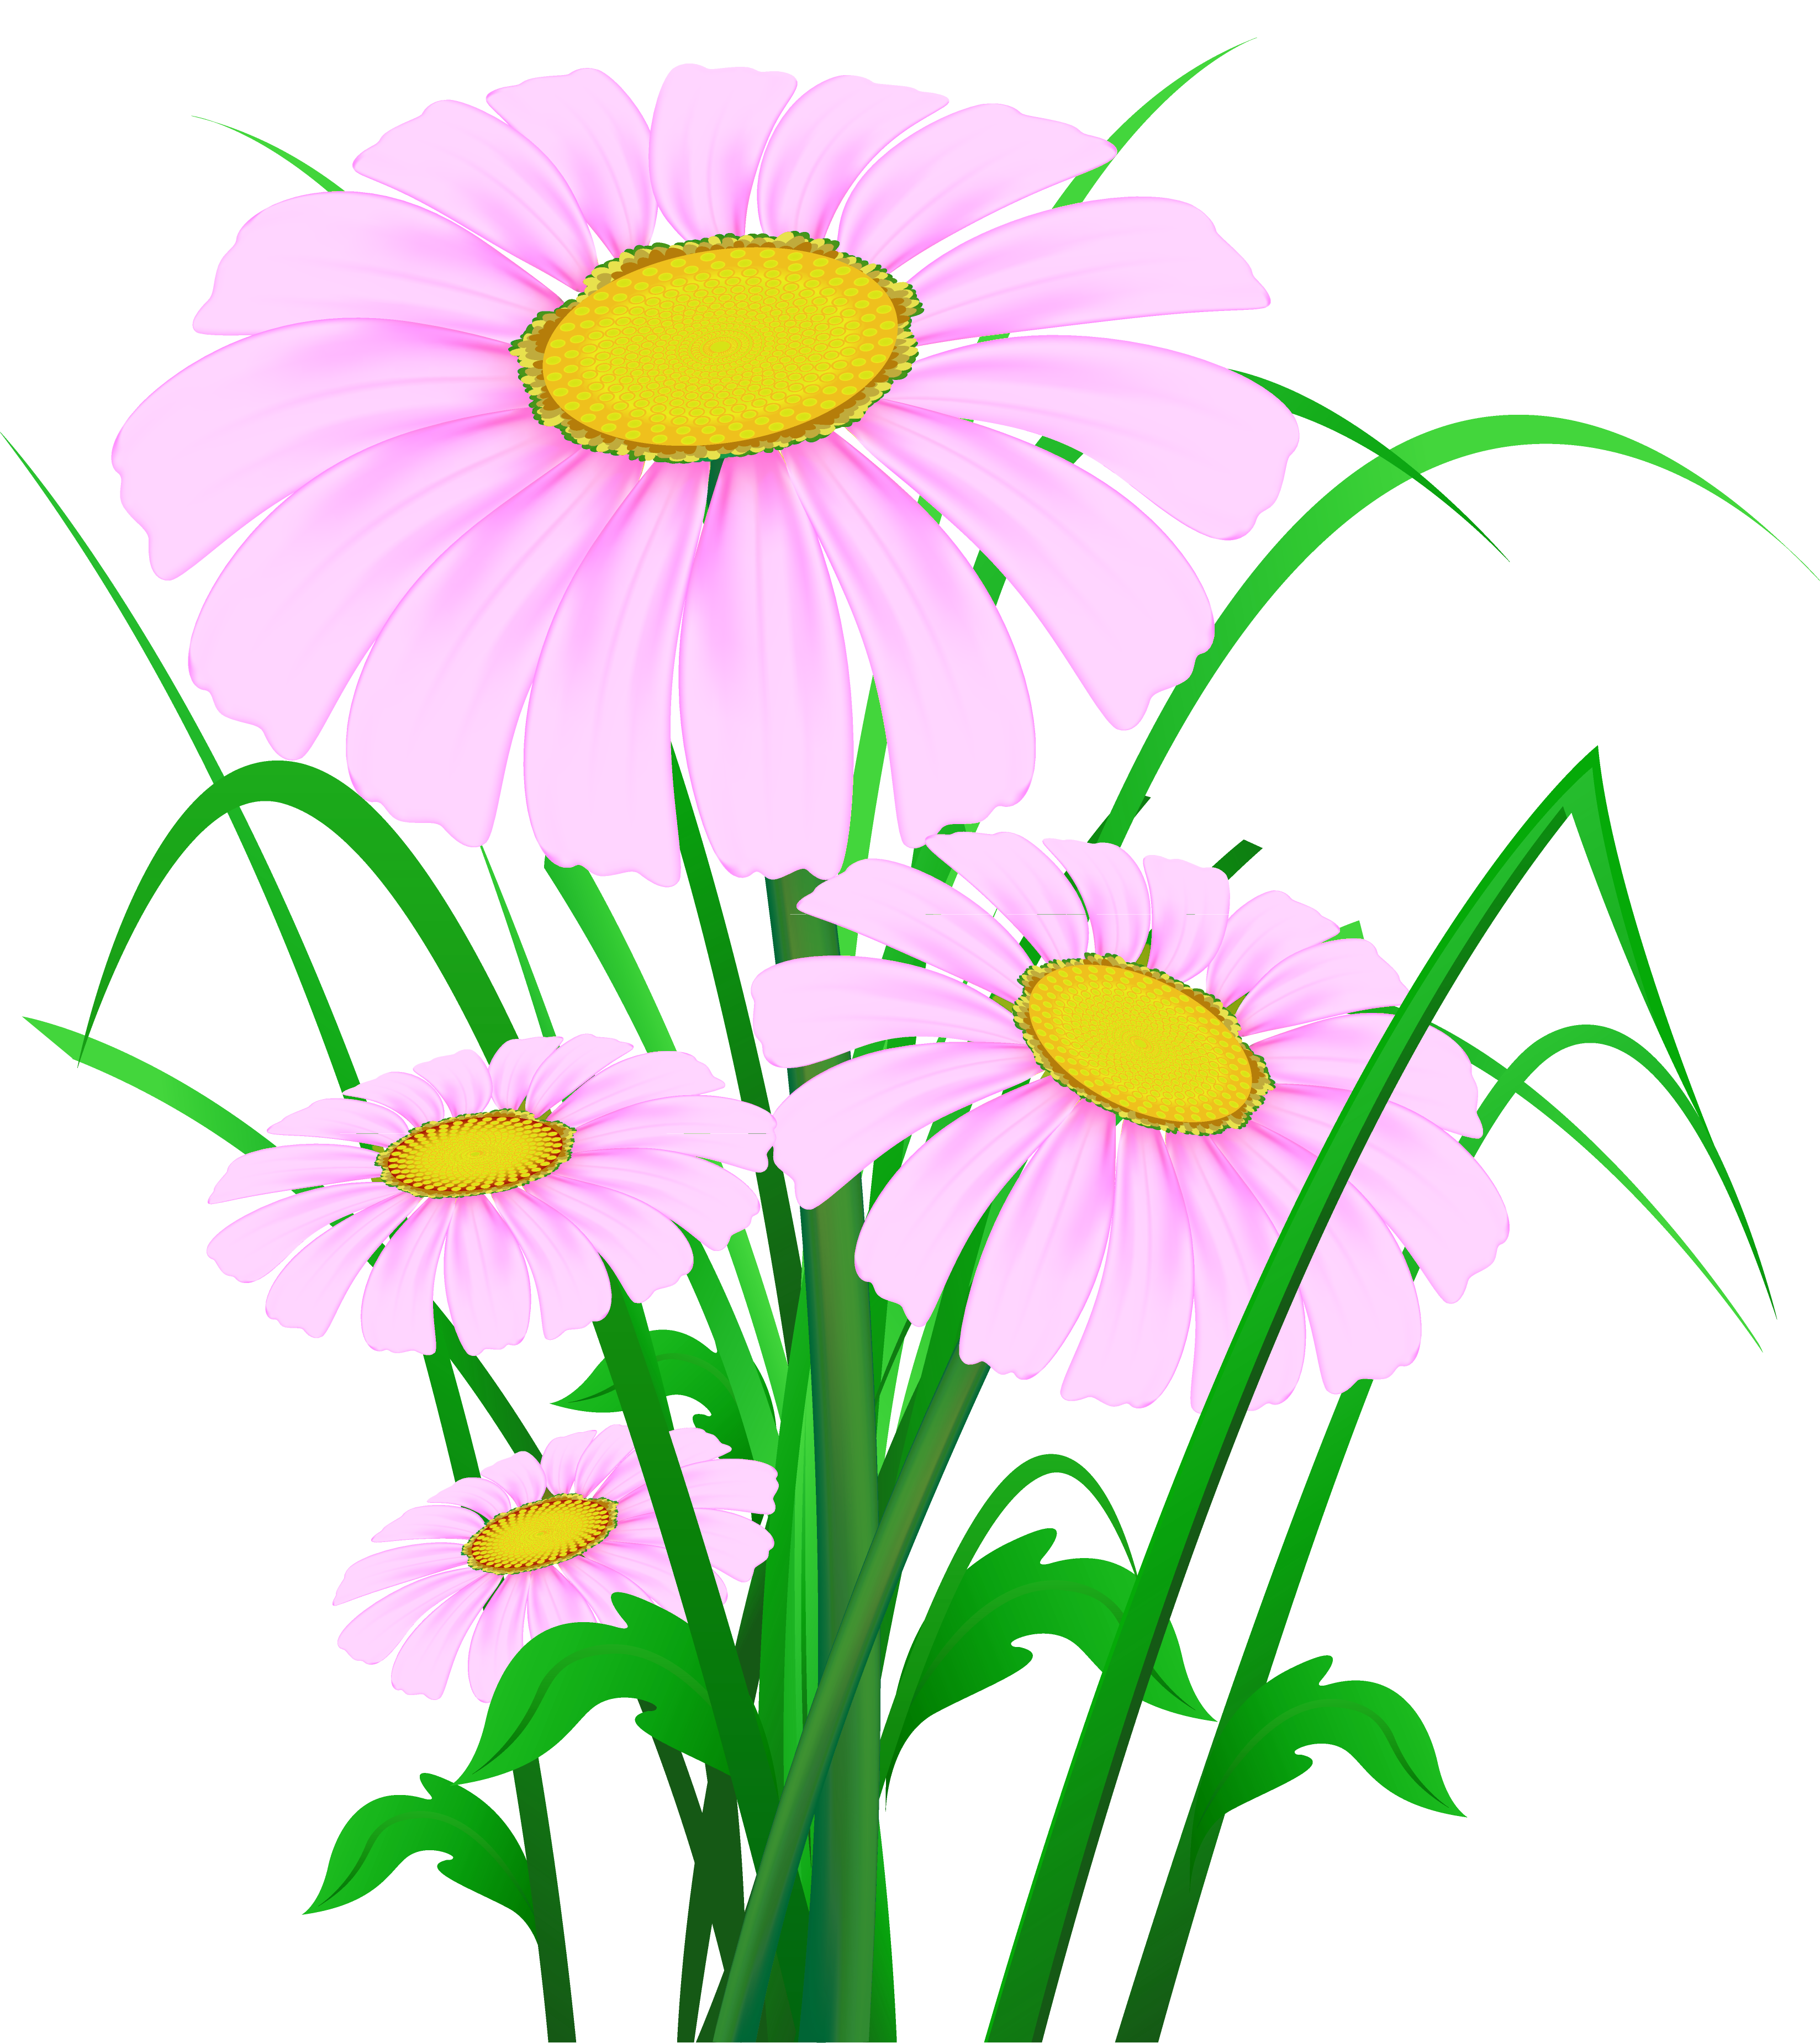 Transparent Pink Daisies PNG Clipart